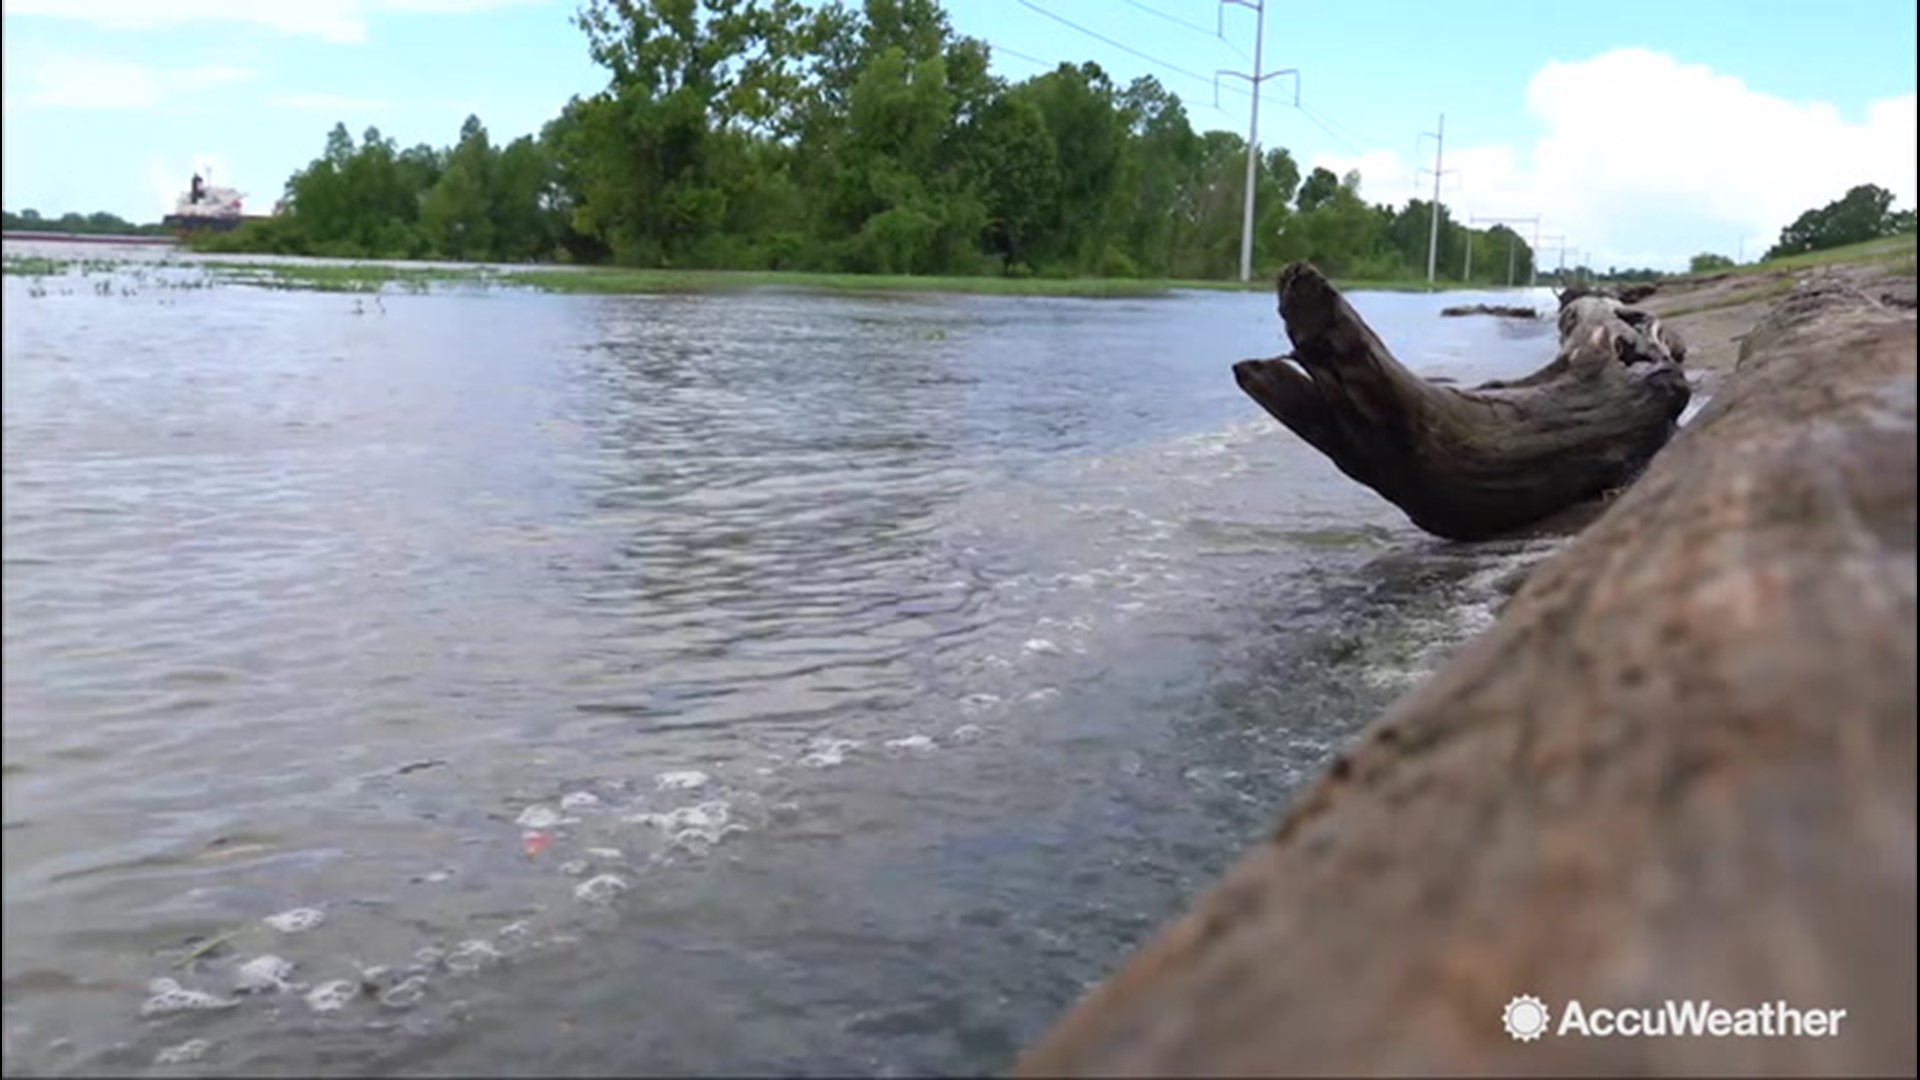 Unseasonably high water in the Mississippi is causing concerns about the levee systems around New Orleans, as hurricane season is just getting started. Accuweather's Jonathan Petramala spoke with emergency managers about  how the city plans to stay safe if a storm comes its way.